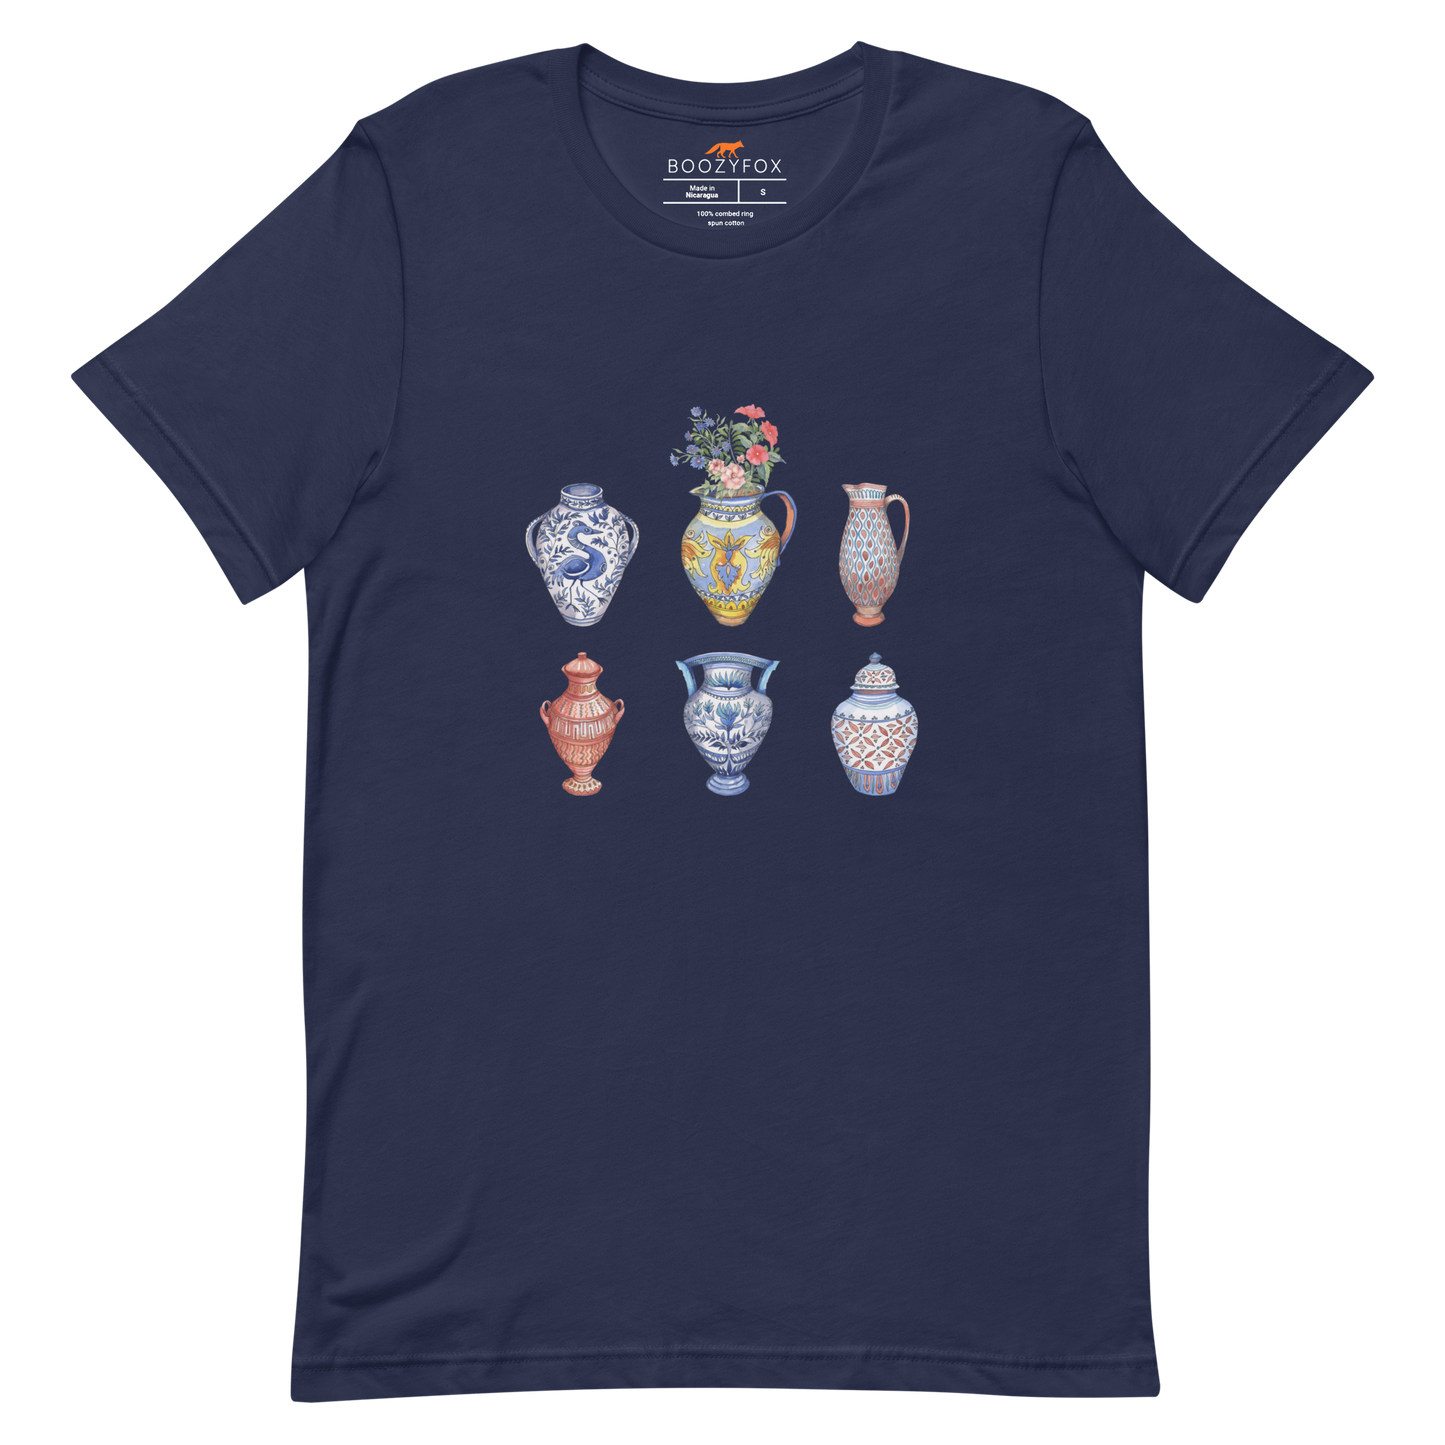 Navy Premium Vase Tee featuring a chic vase graphic on the chest - Artsy Graphic Vase Tees - Boozy Fox